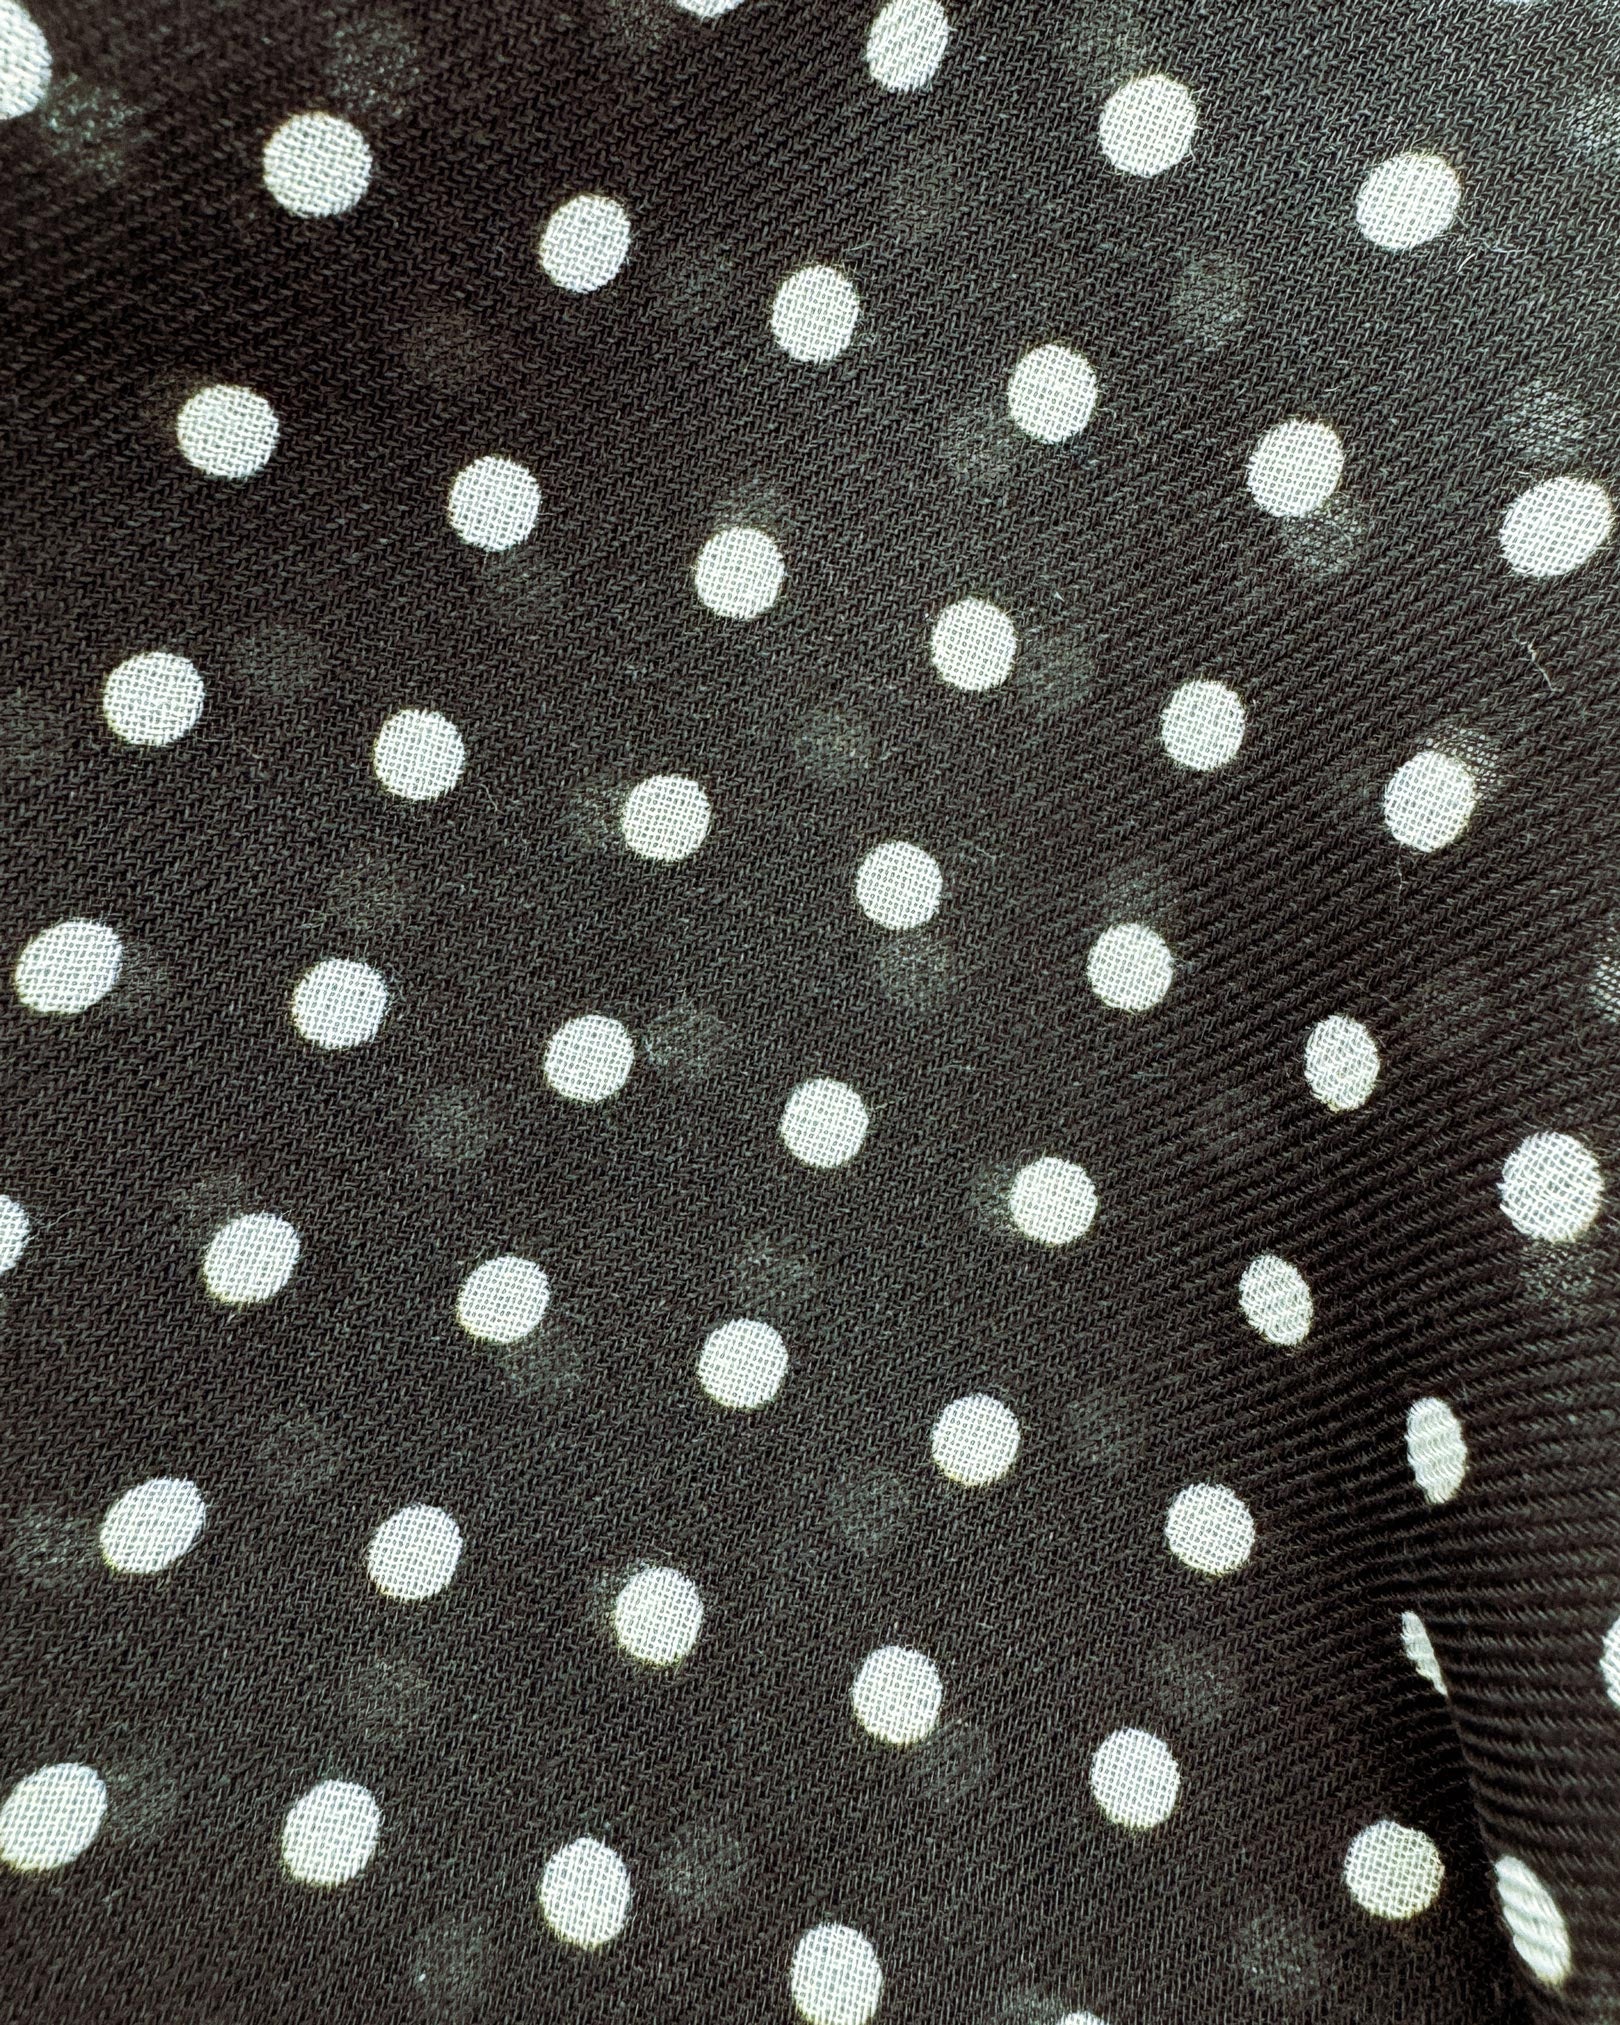 A flat, close up view of 'The Shinagwa' wide scarf. Clearly showing the modal and wool fabric and attractive white polka dot pattern against a black background.